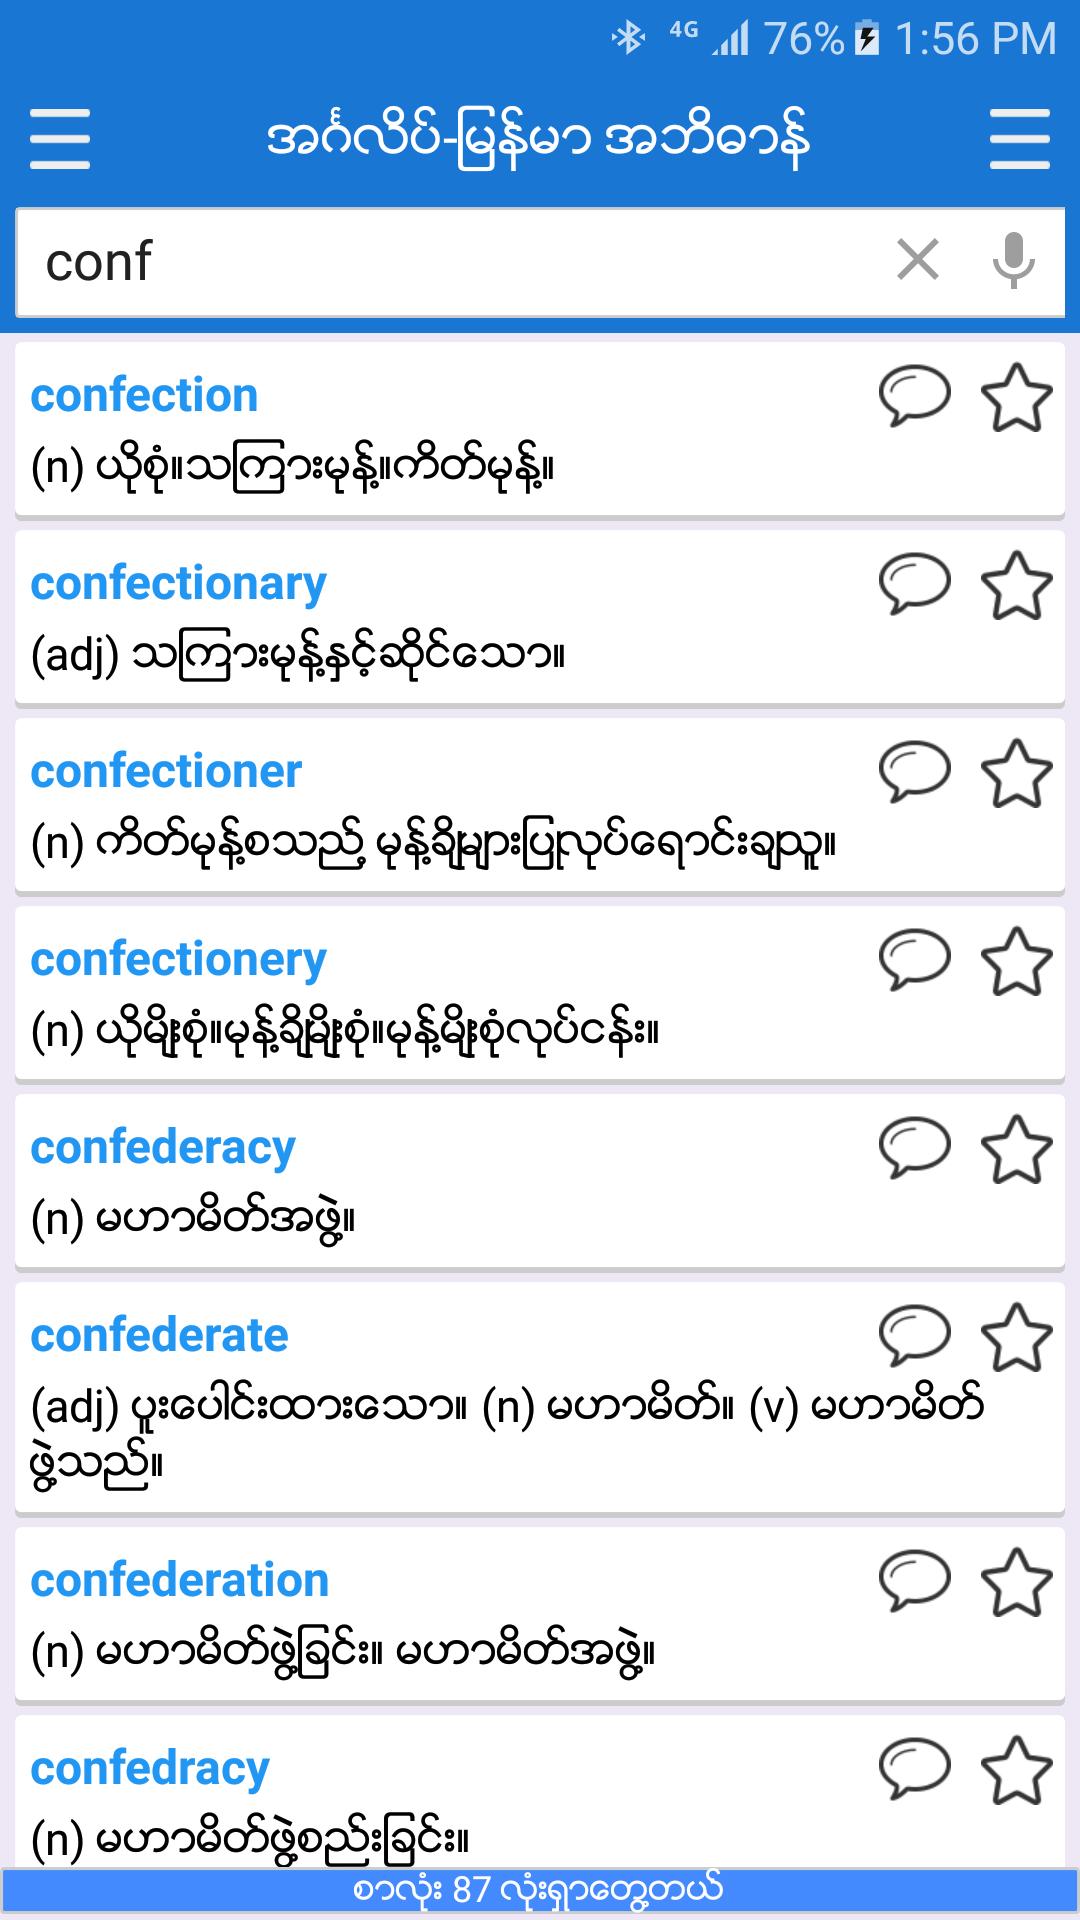 English-Myanmar Dictionary for Android - APK Download